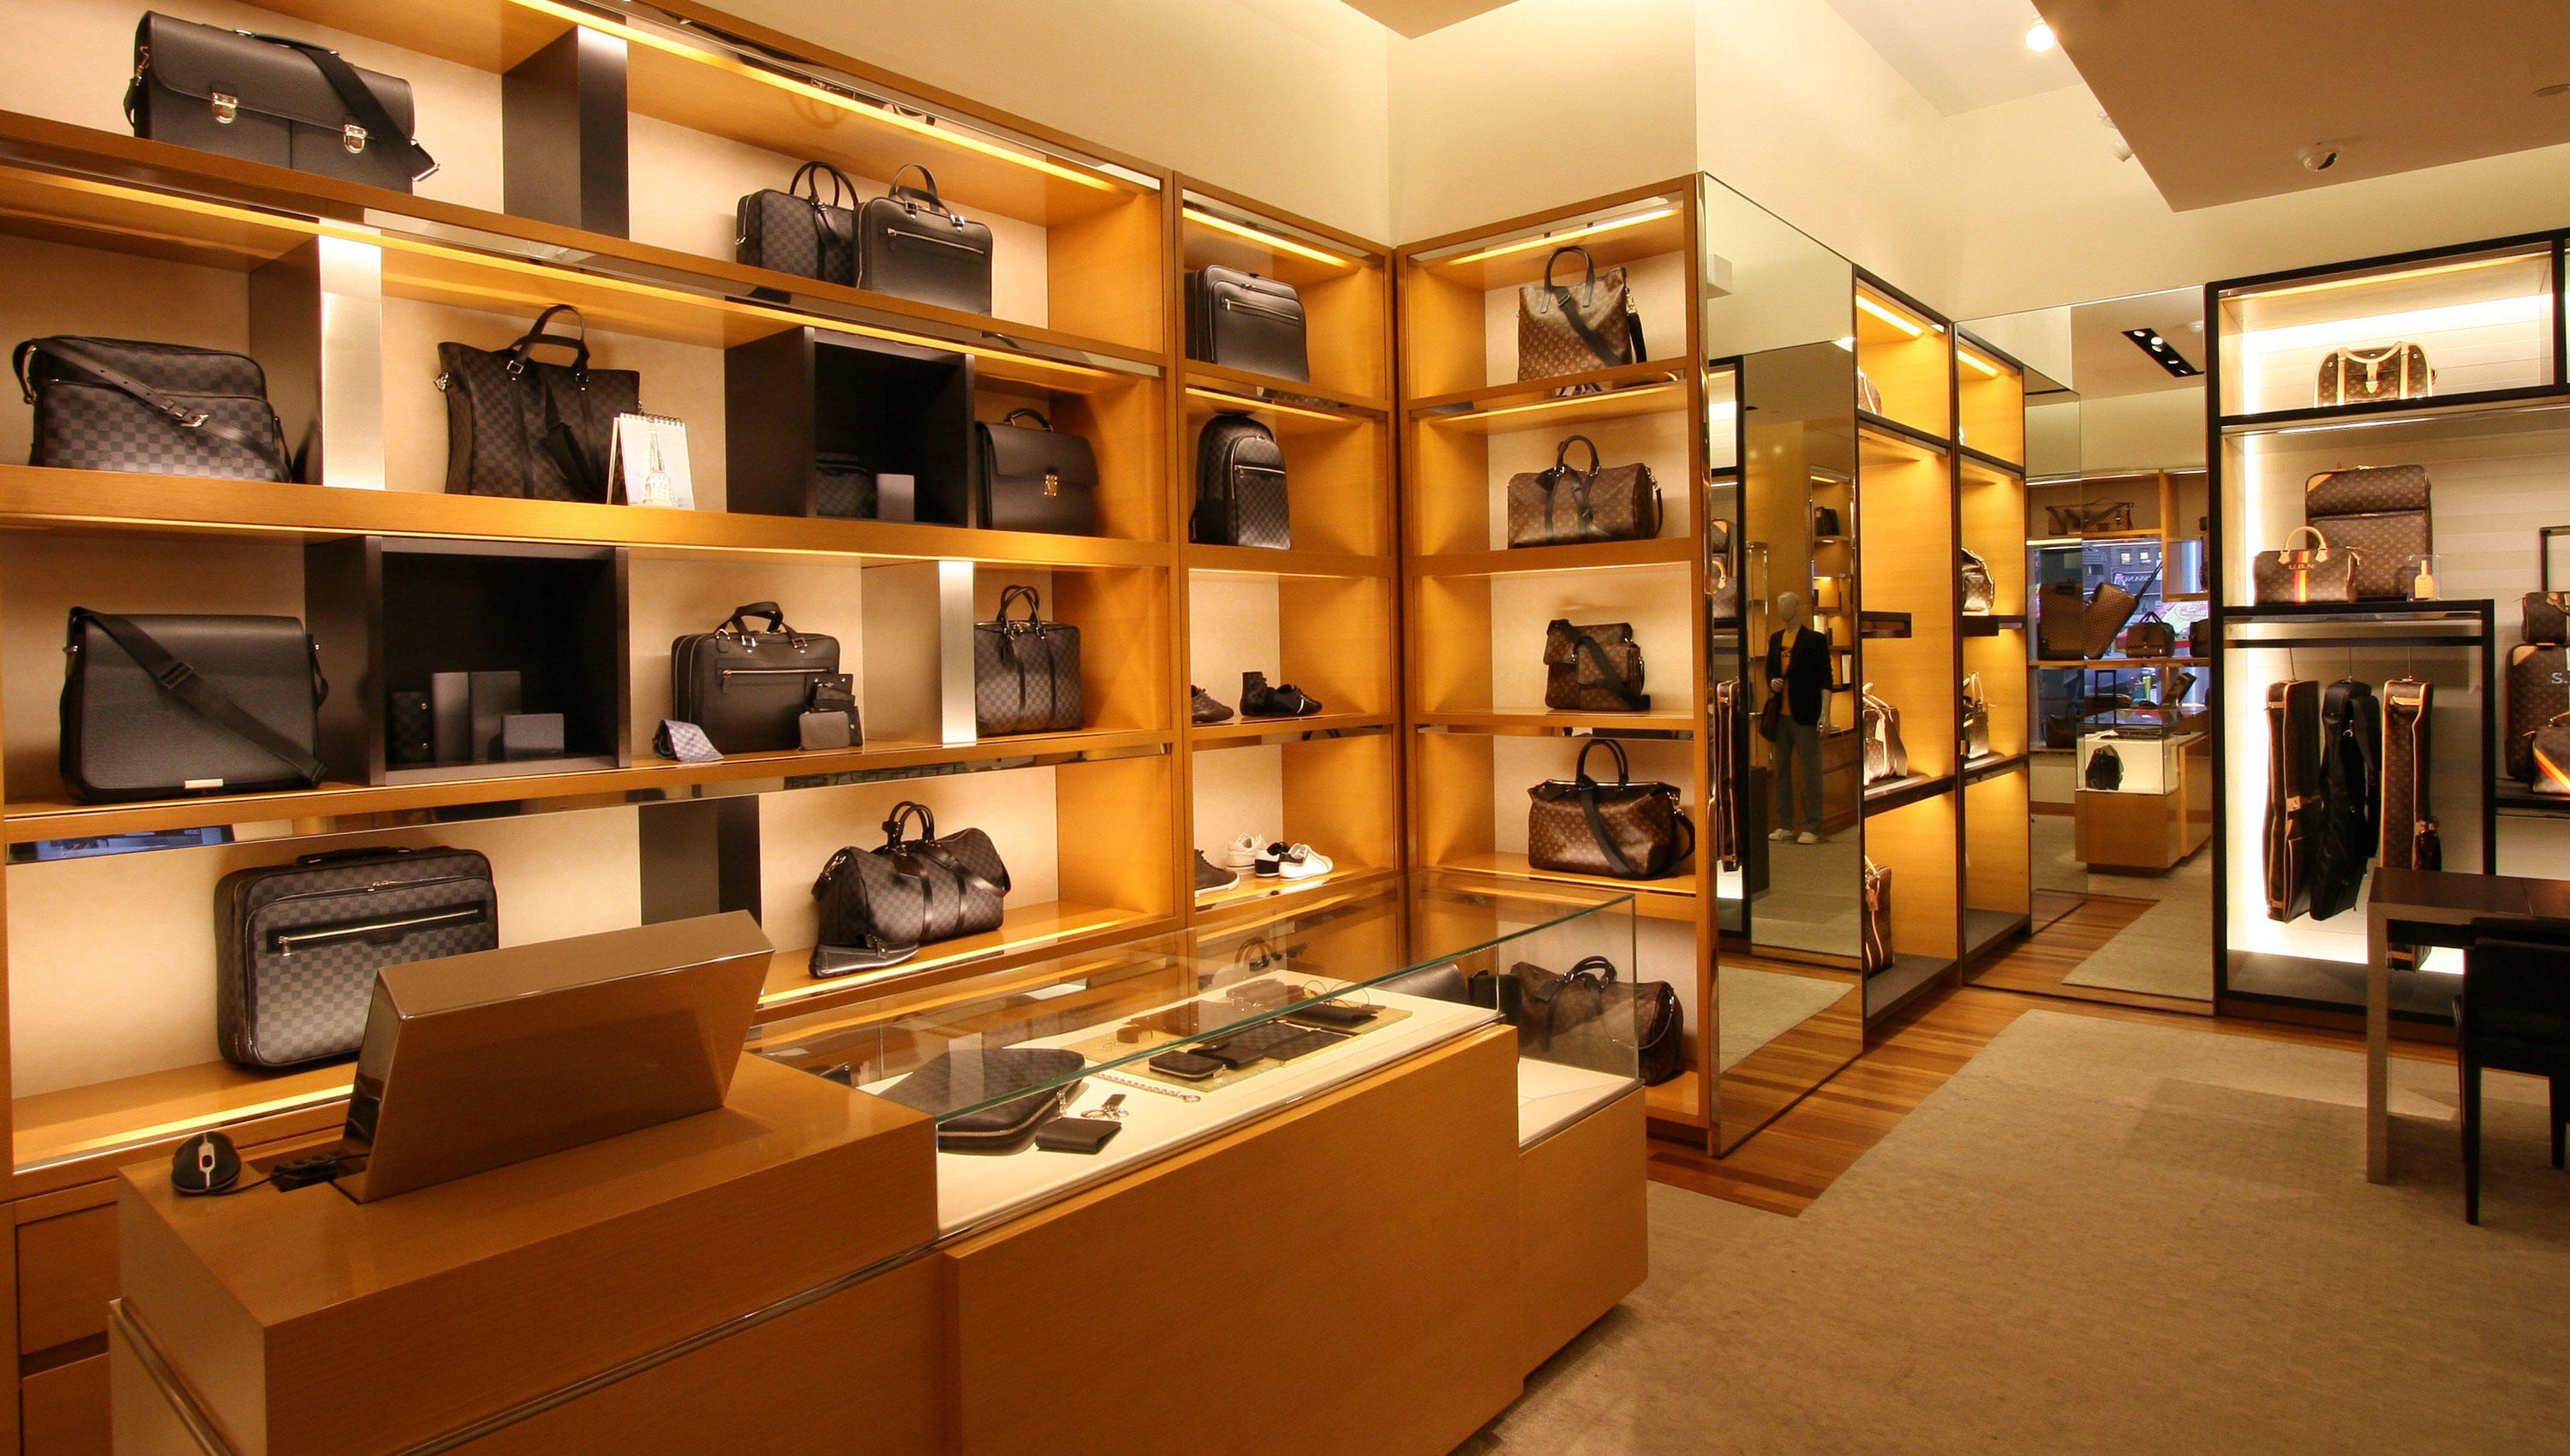 Louis Vuitton 1 E 57th St New York Ny 10022 | Confederated Tribes of the Umatilla Indian Reservation